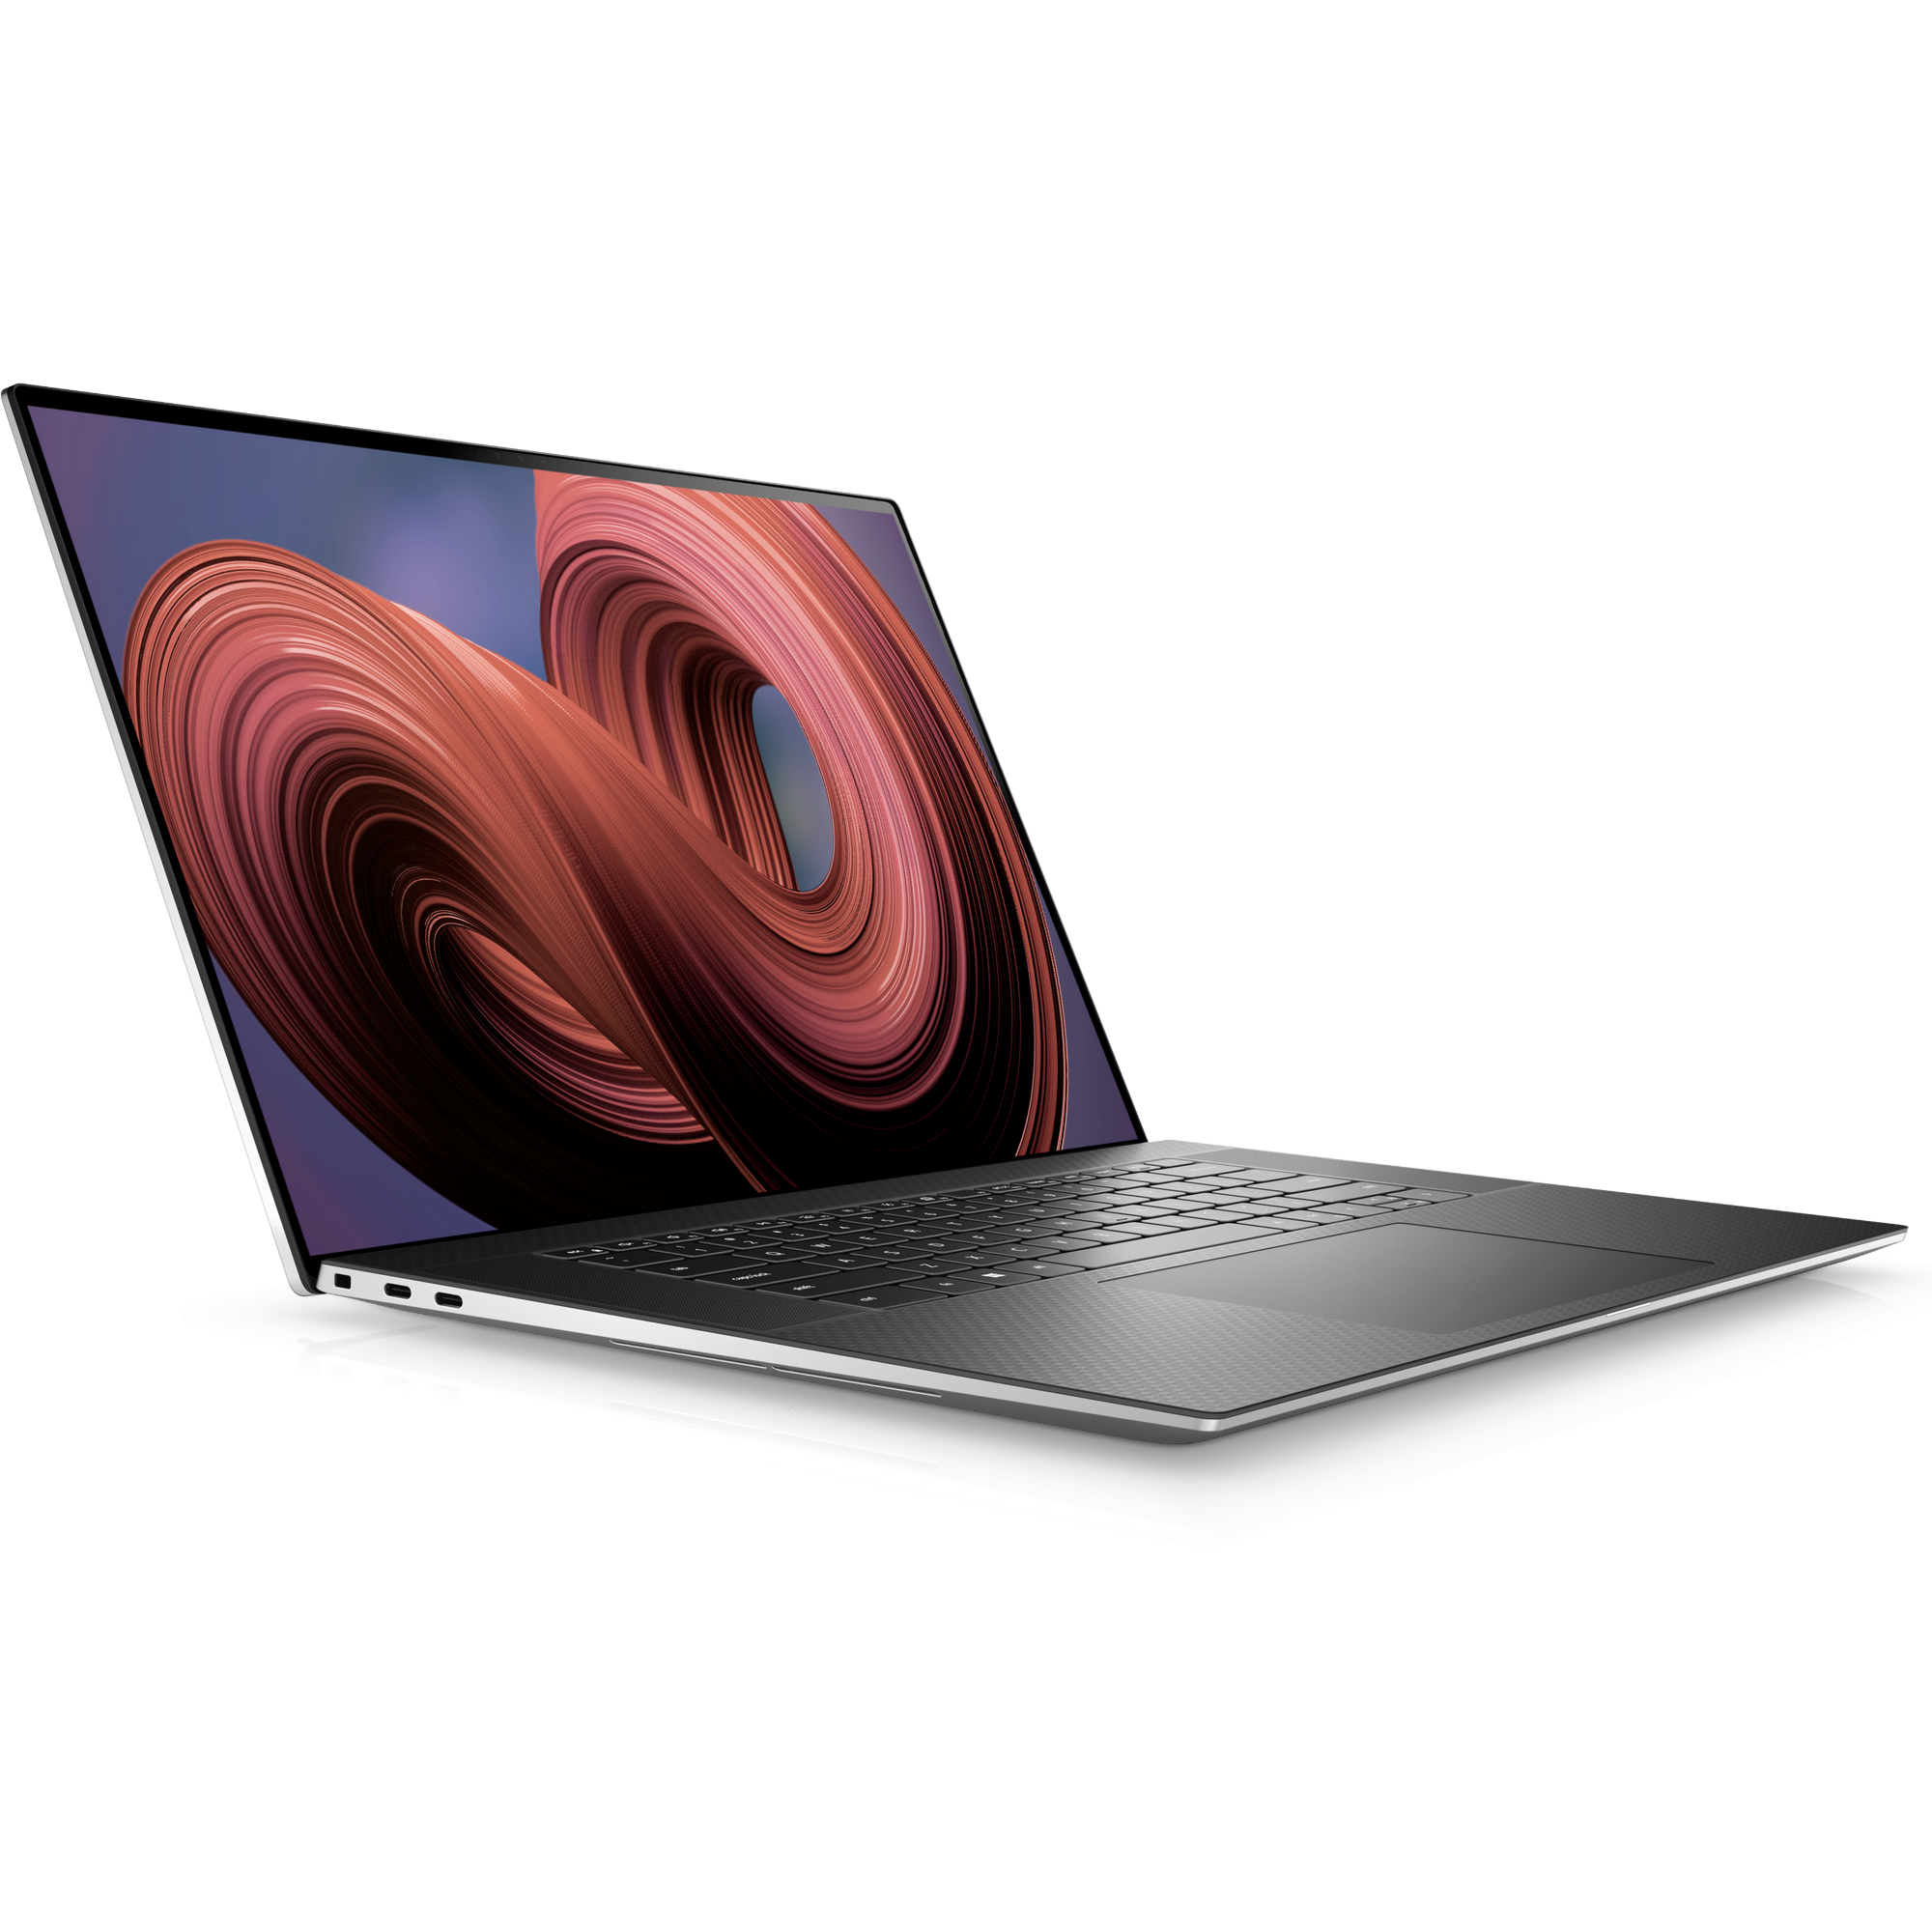 Angled front view of Dell XPS 17 facing right